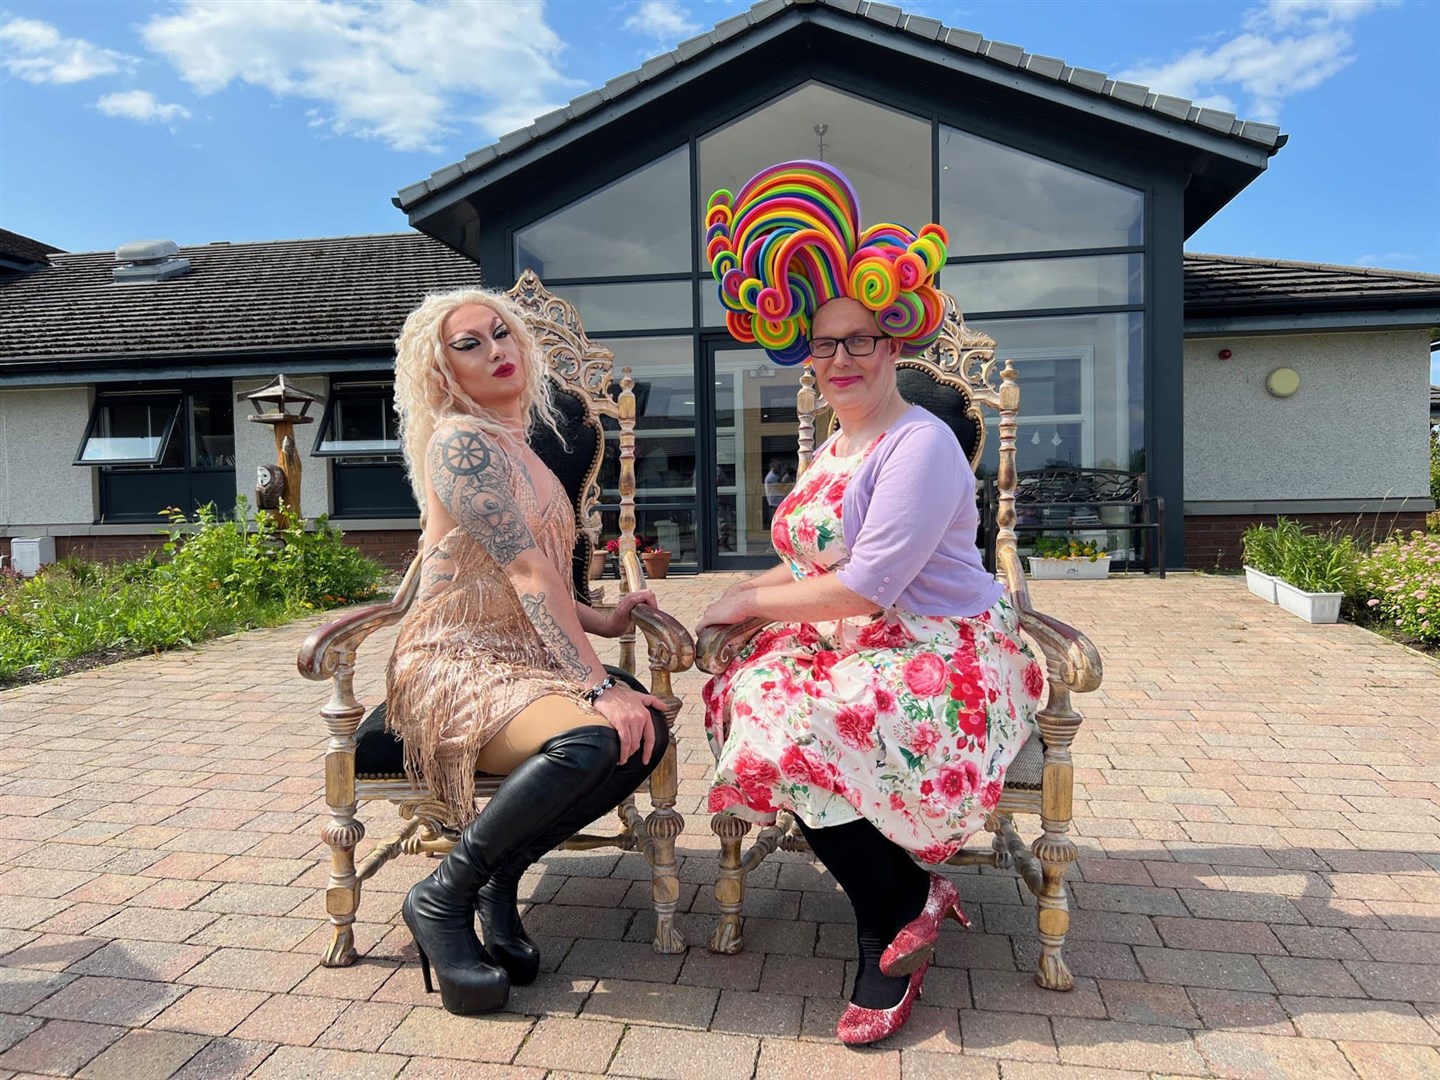 Drag queens Venus Guytrap and Miss Lossie Mouth, aka Darryl Alexander Geegan and John Campbell, have been providing fun for care home residents across the Highlands.